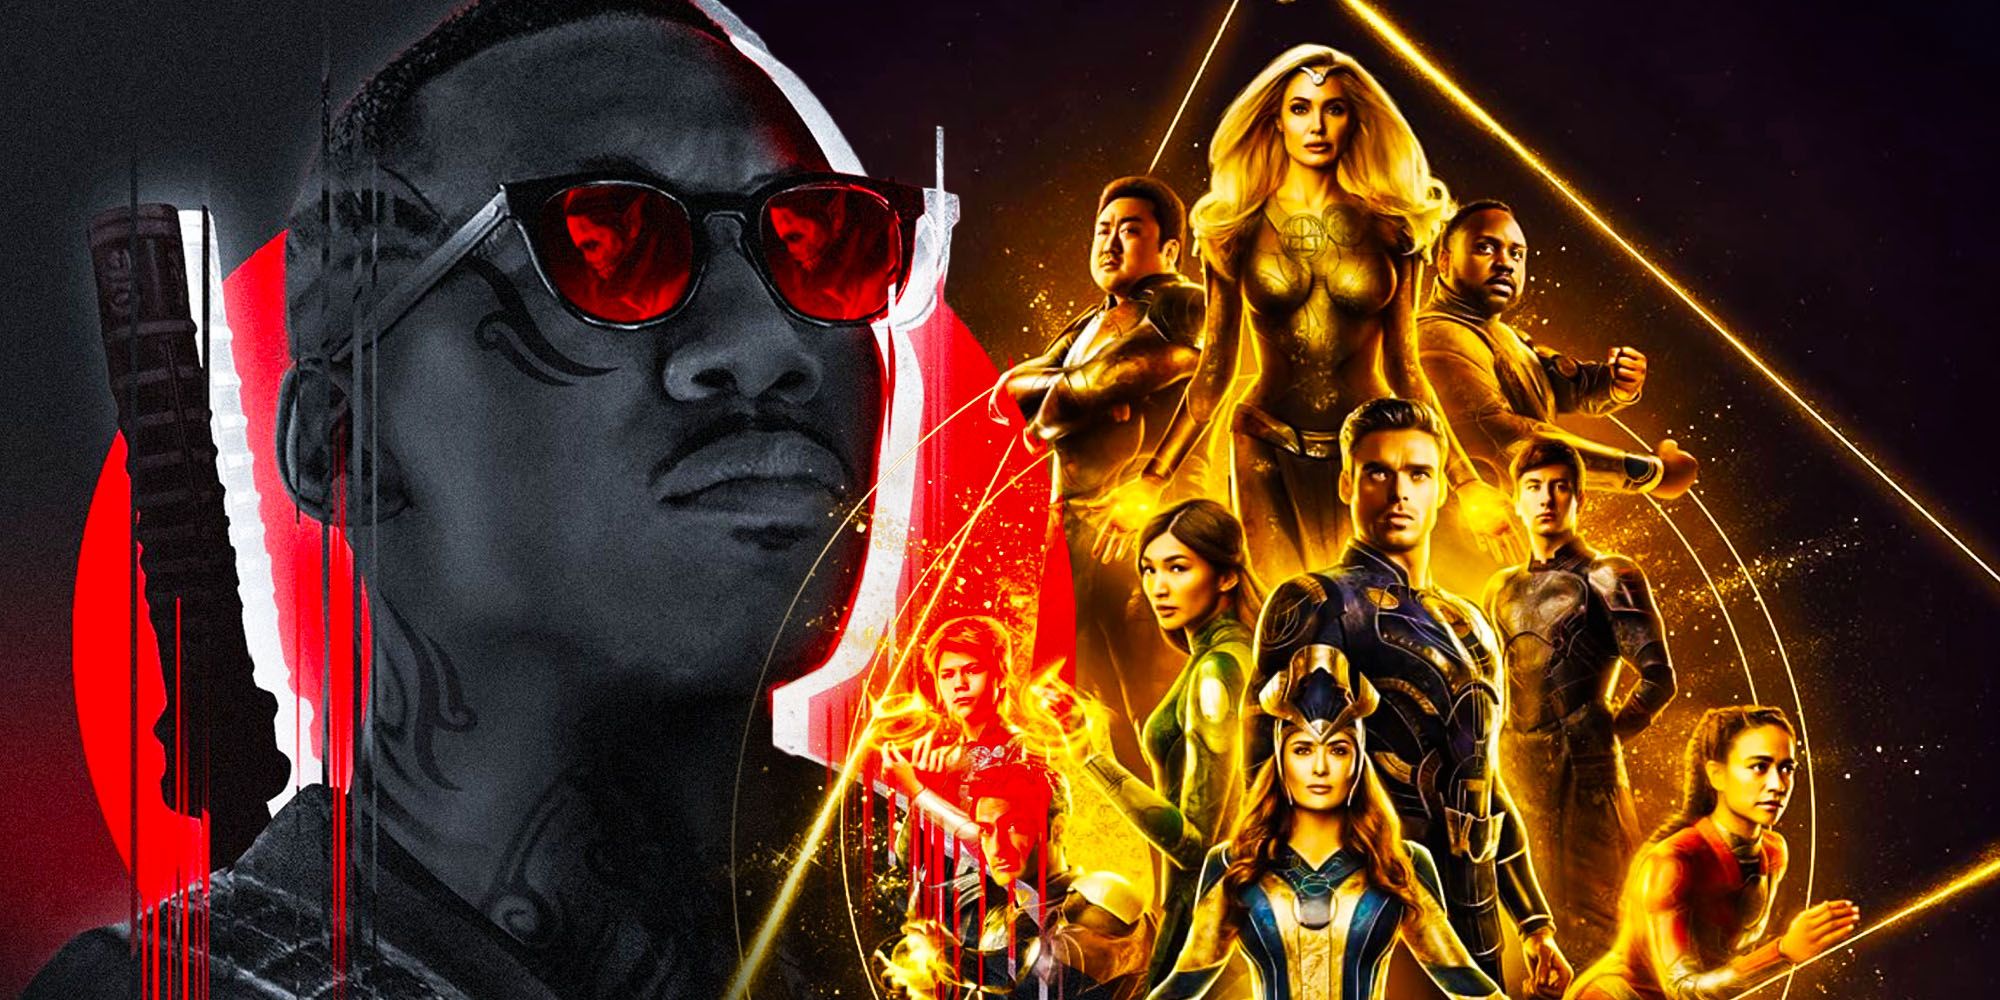 Eternals Raises 6 Questions Blade’s MCU Movie Needs To Answer